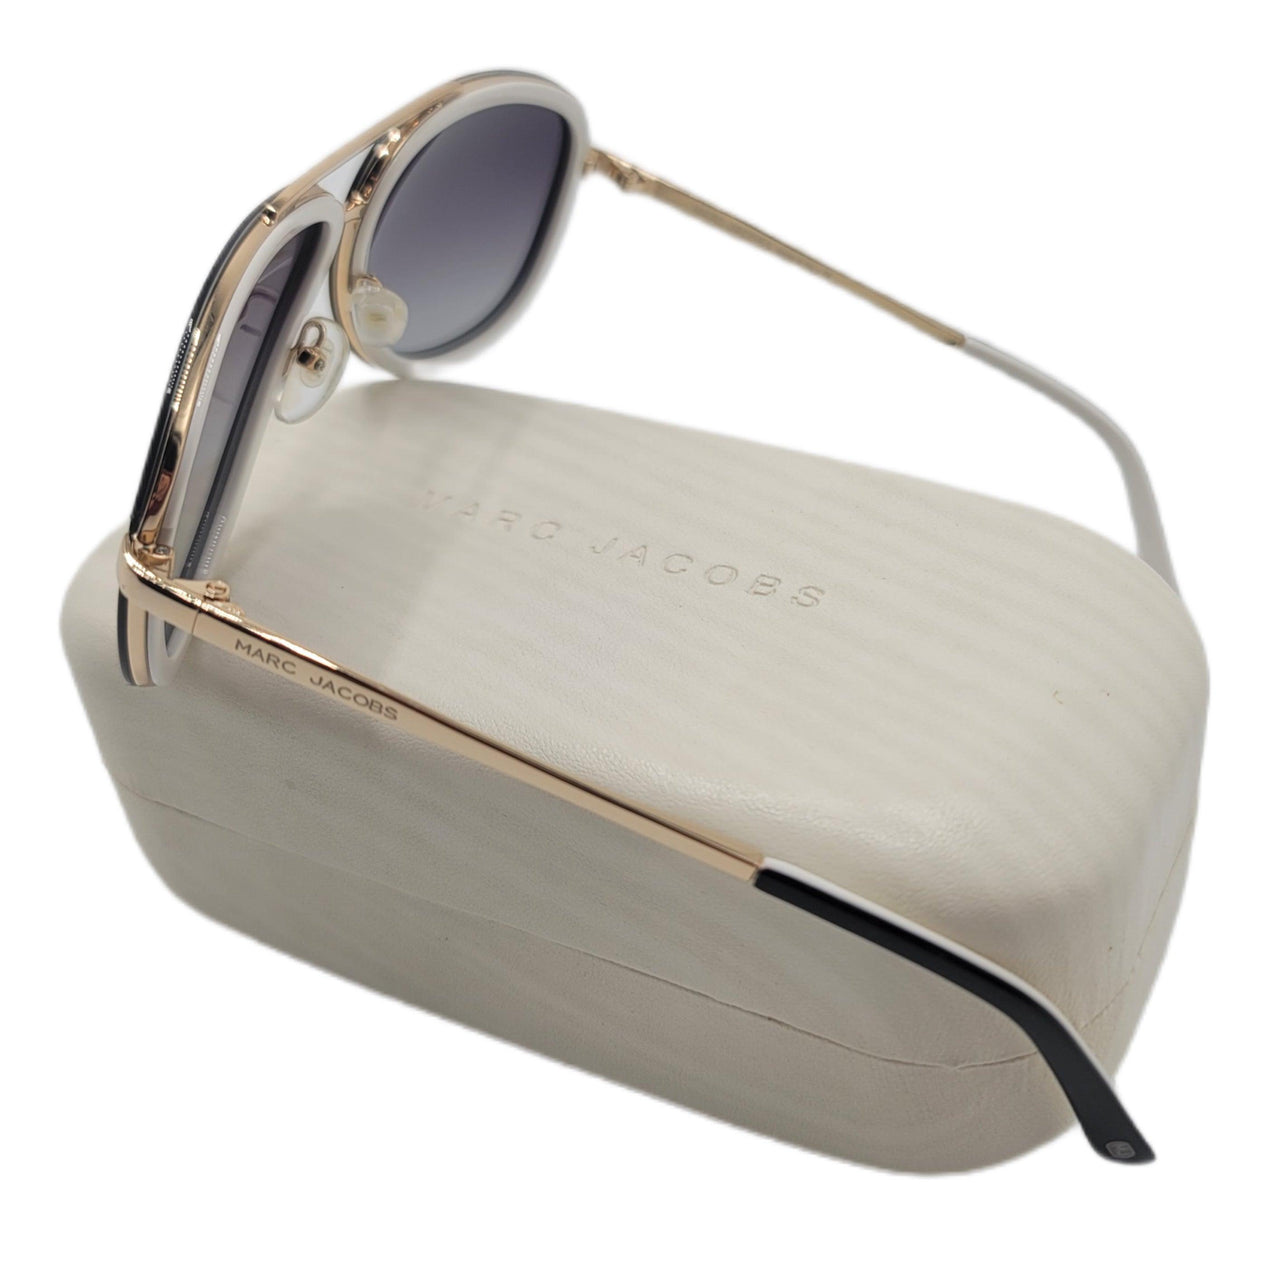 Marc Jacobs Sunglasses 1 - EBM | TBC elorabym.com glasses sunglasses sunshades Pakistan - Discounted Prices - Online Store - Best Quality In Pakistan - Sale -Cash On Delivery - Online Payment - Bank Transfer Facility - Shipping Worldwide - Sleepwear - Loungewear - Nighties - Crossbody - Handbag